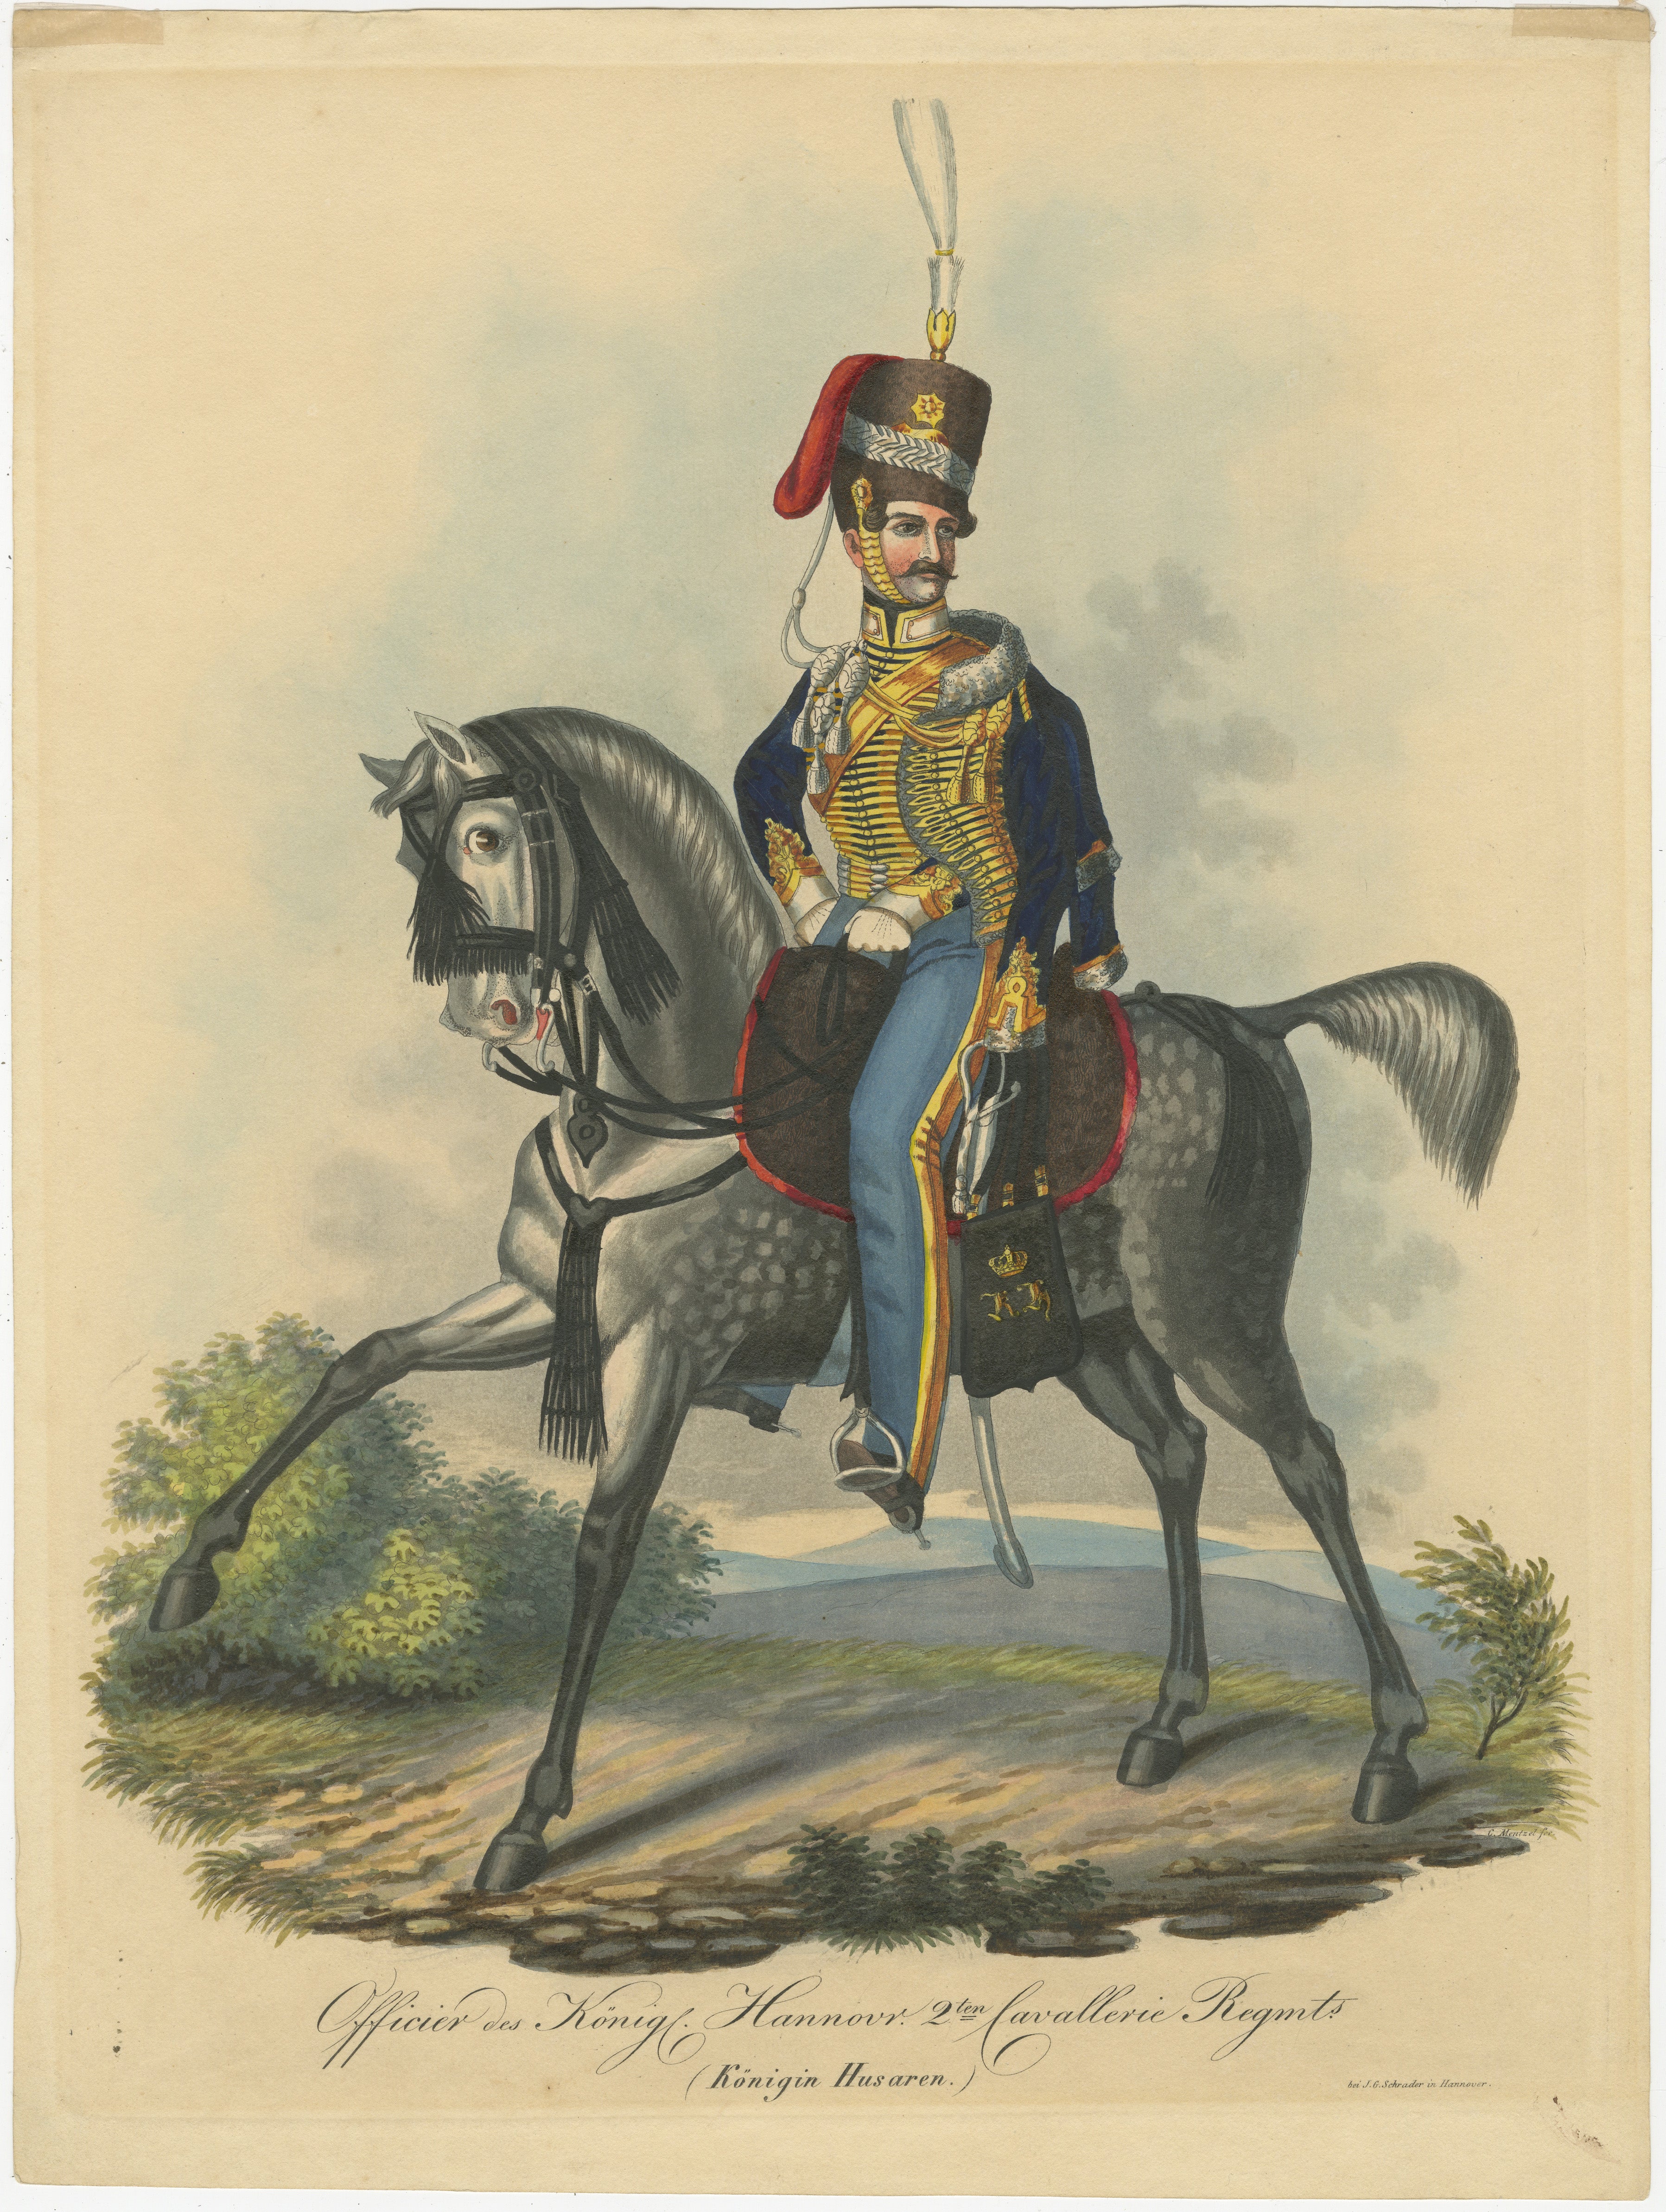 This hand-colored lithograph from the 19th century depicts an officer from the King's German Legion, specifically the 